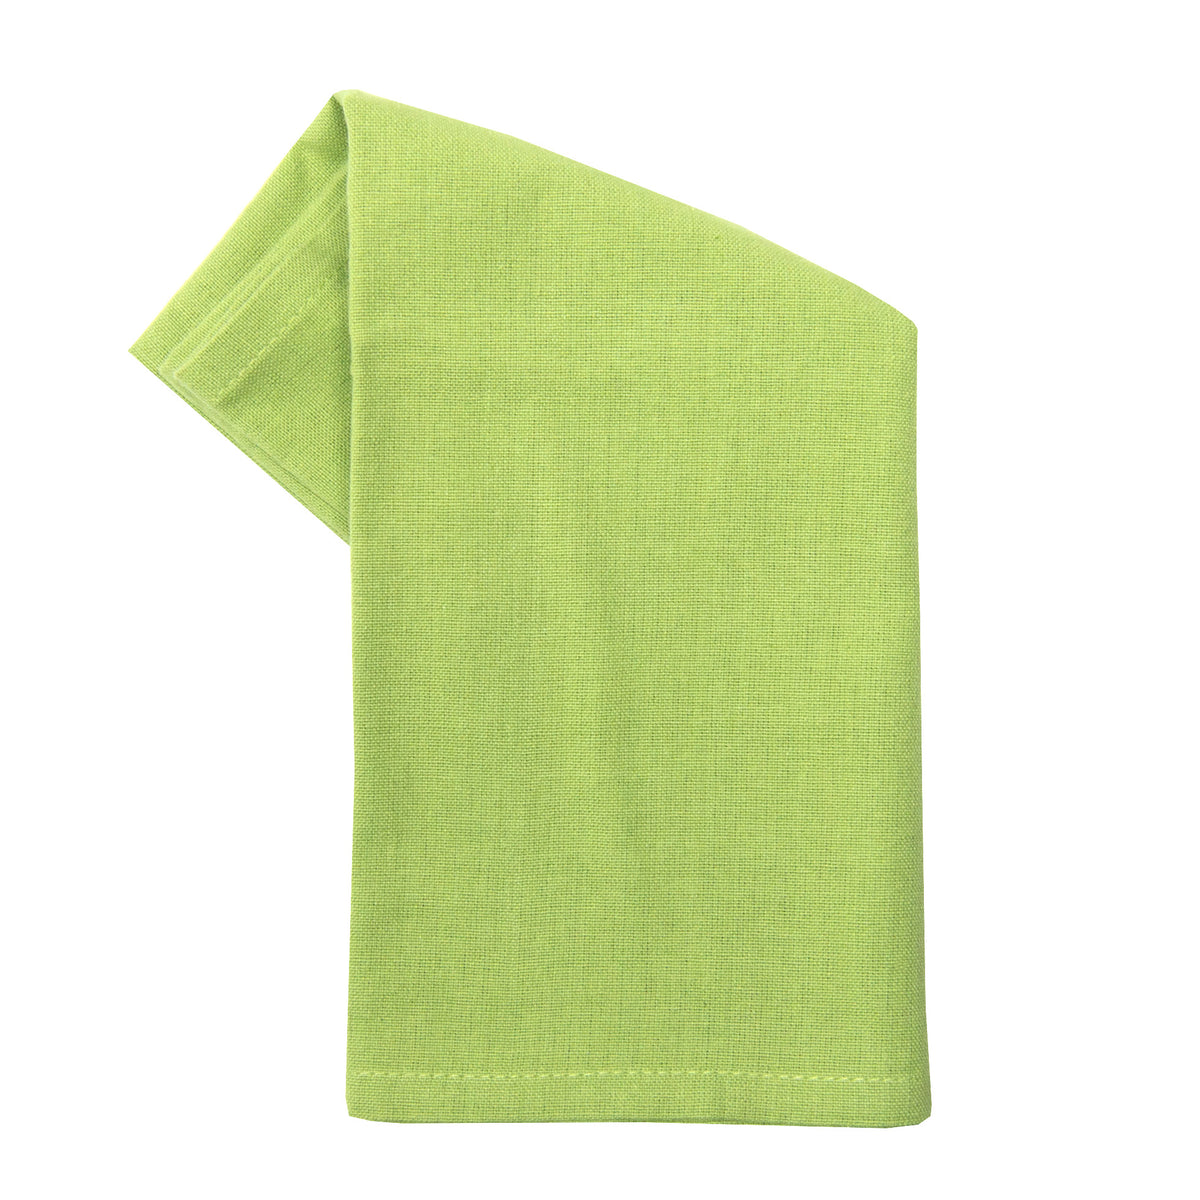 Solid Color Microfiber Towel Set, Household Towel With Hanging